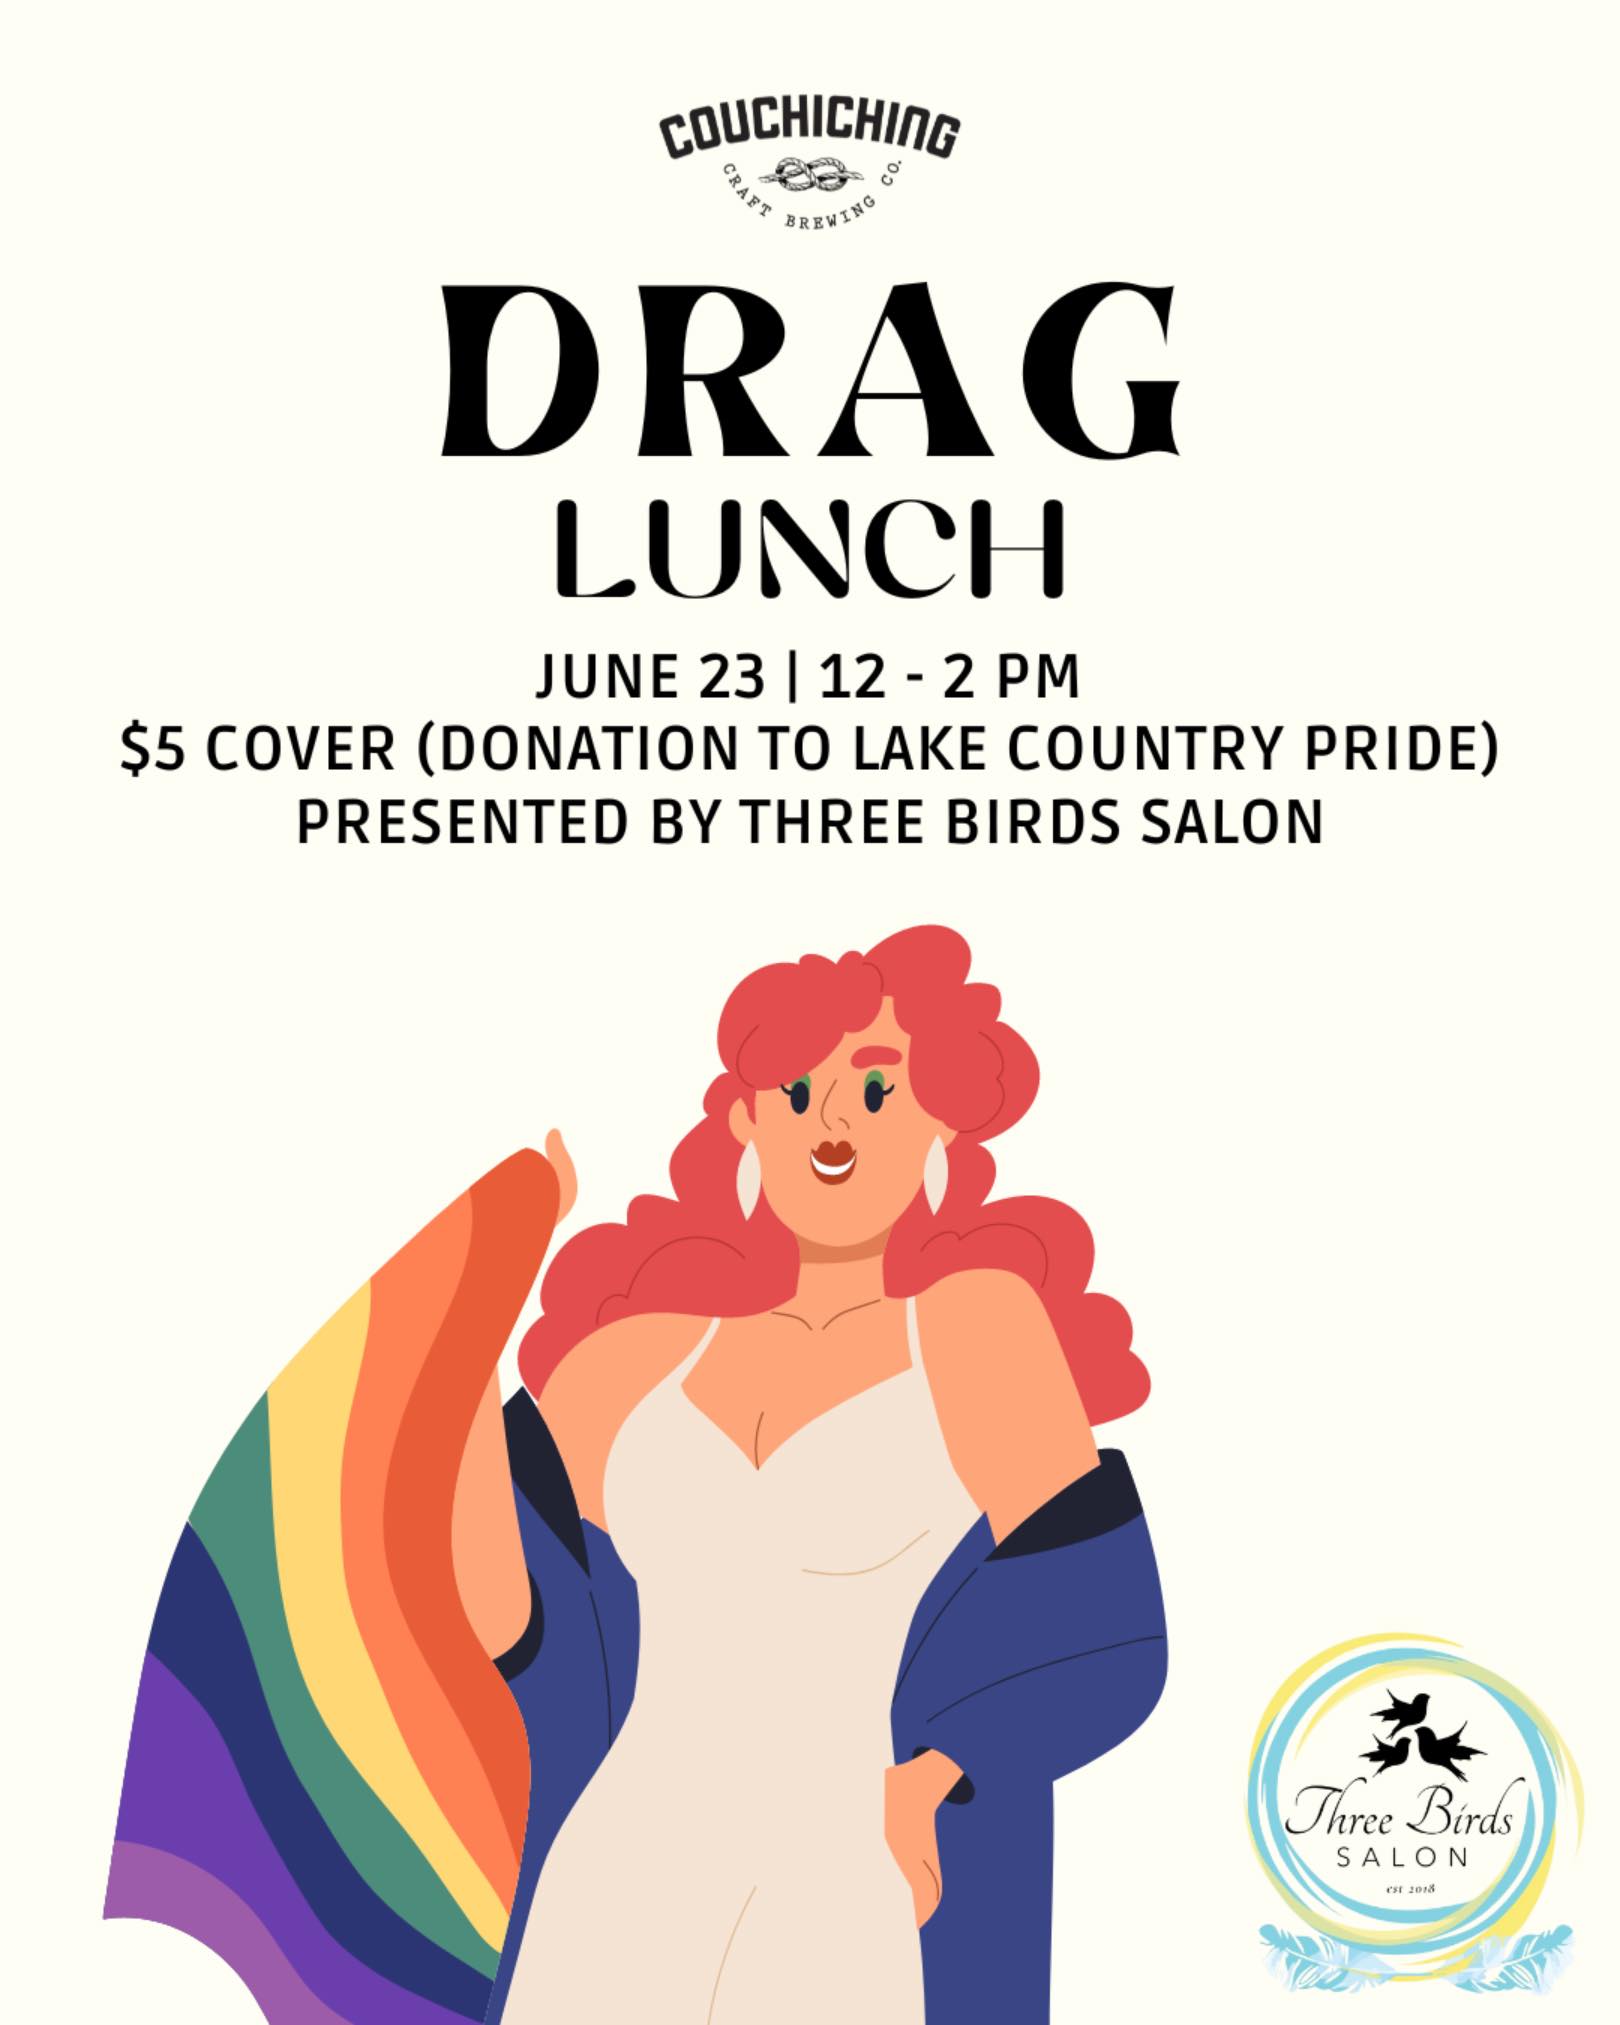 Couchiching Craft Brewing Co Drag Brunch